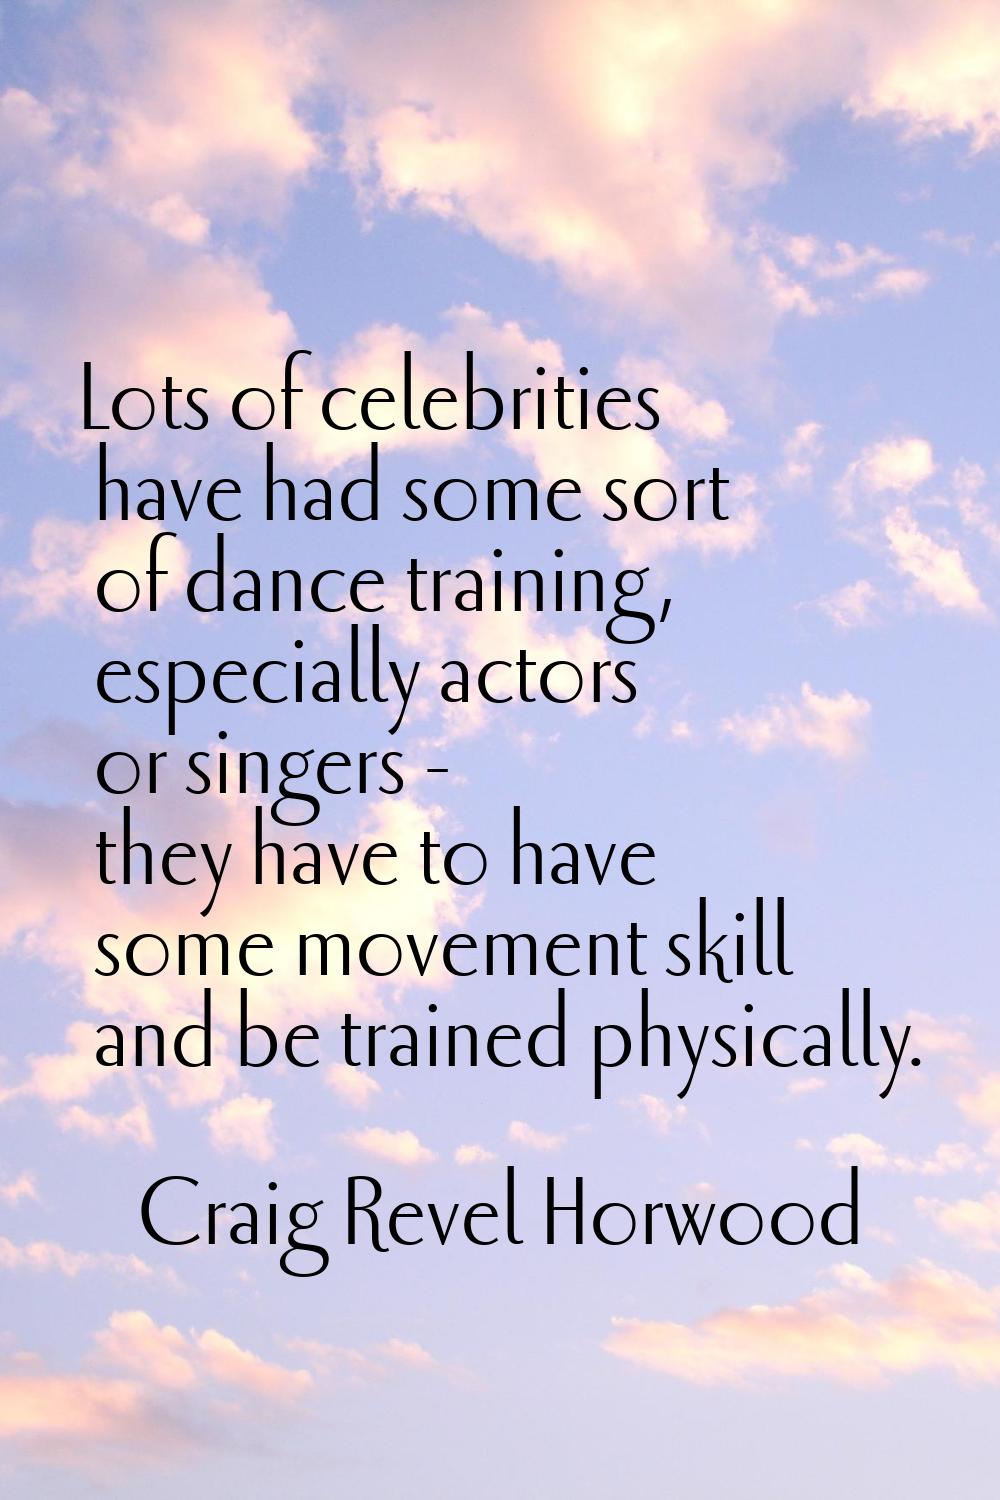 Lots of celebrities have had some sort of dance training, especially actors or singers - they have 